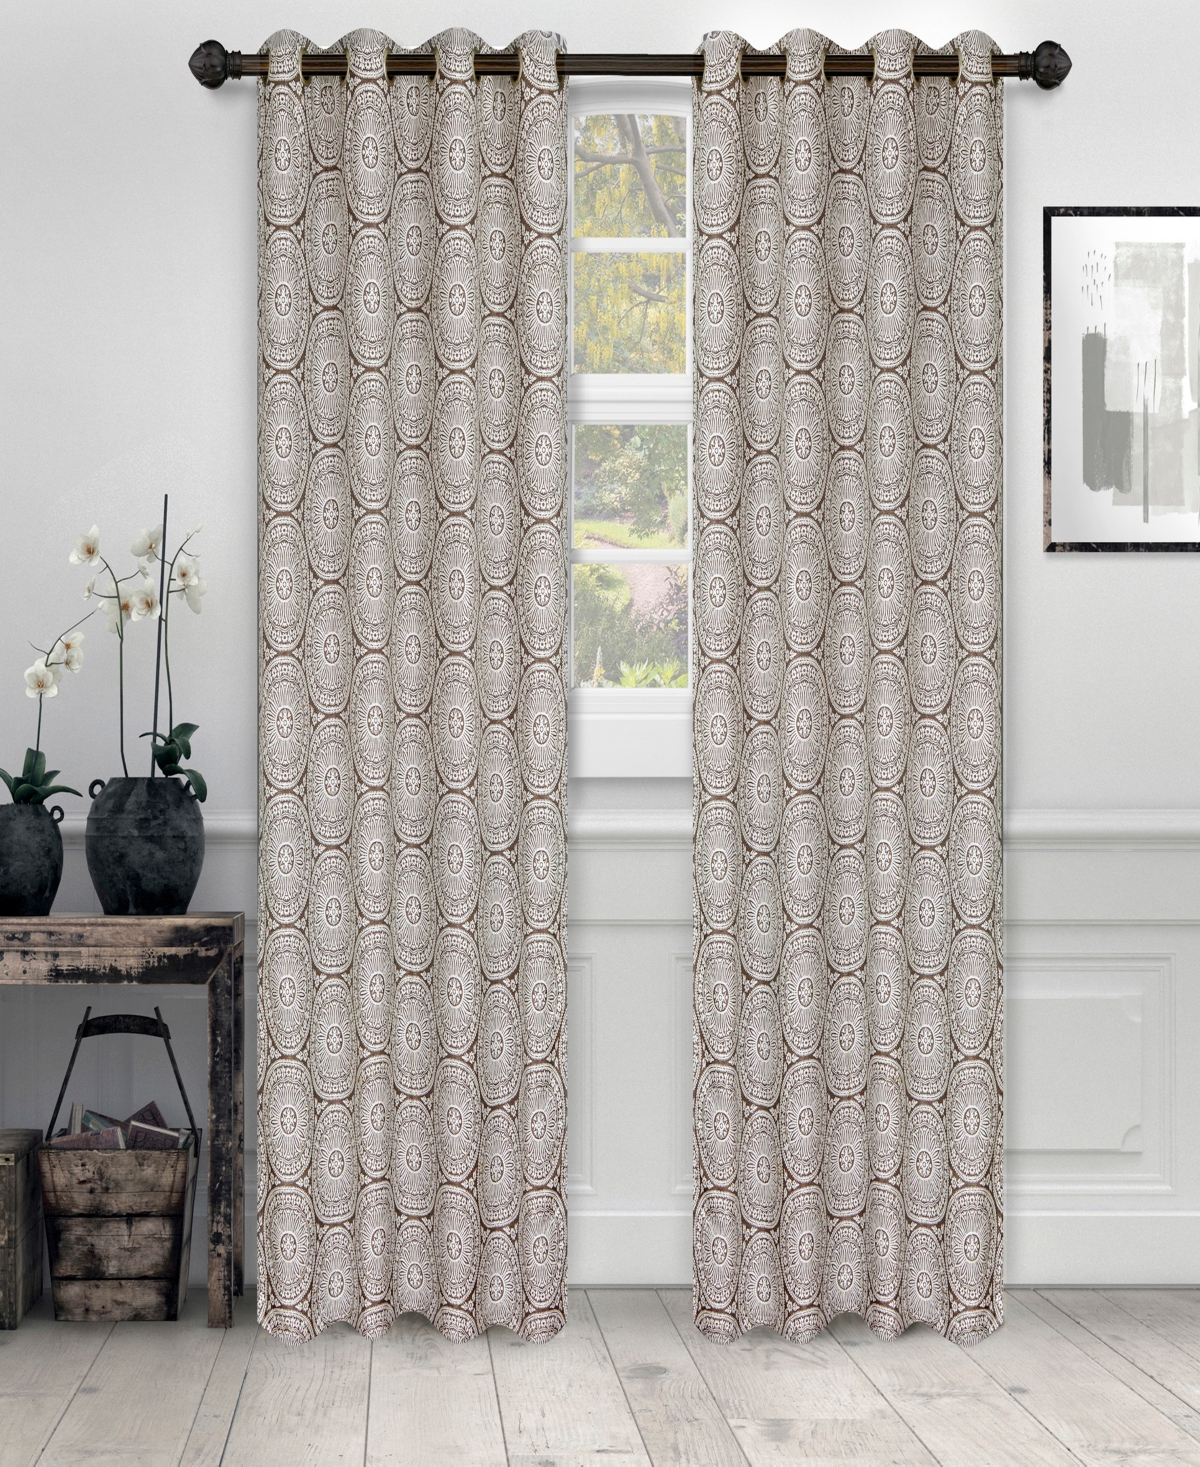 Traditional Eminence Jacquard 2-Piece Curtain Panels with Grommet Header Top, 52" X 63" - Silver